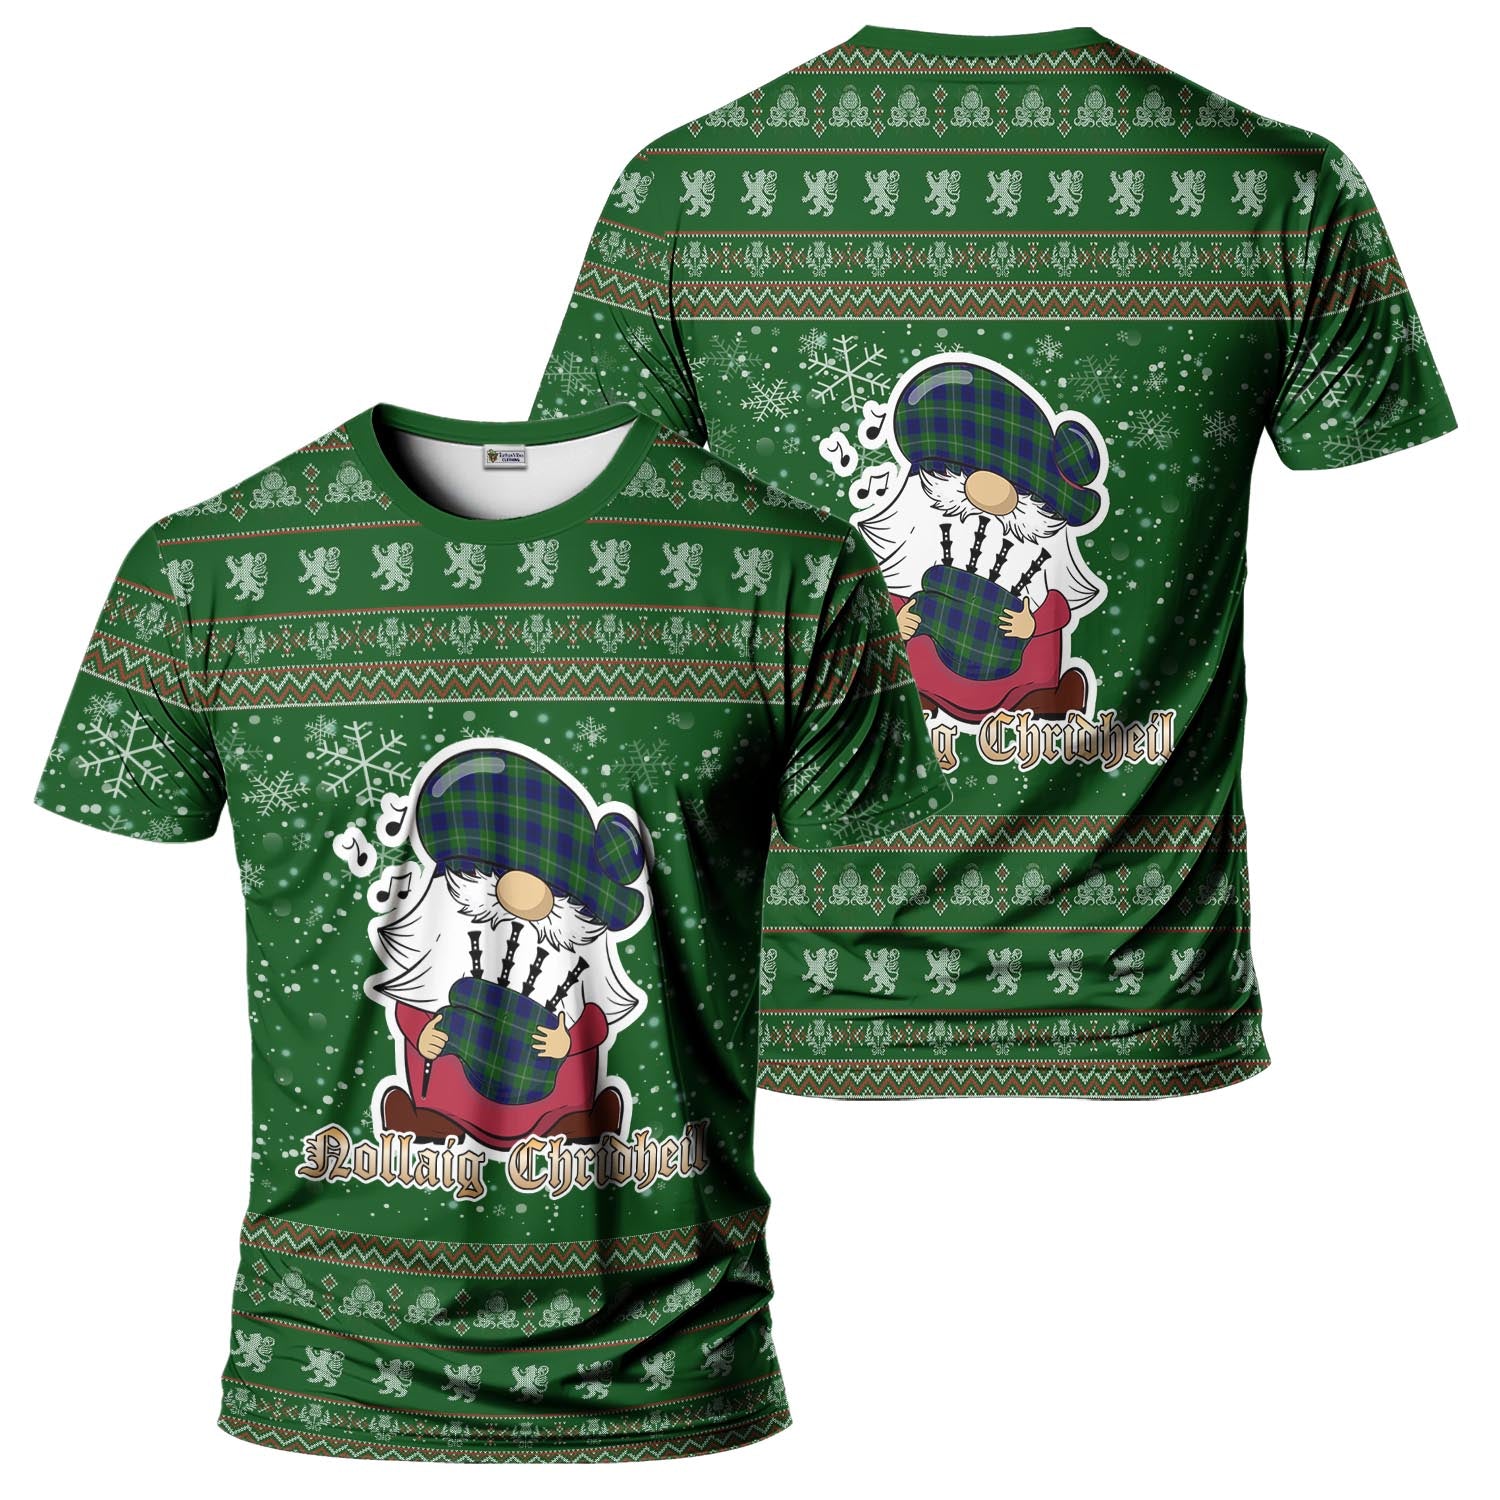 Oliphant Modern Clan Christmas Family T-Shirt with Funny Gnome Playing Bagpipes Men's Shirt Green - Tartanvibesclothing